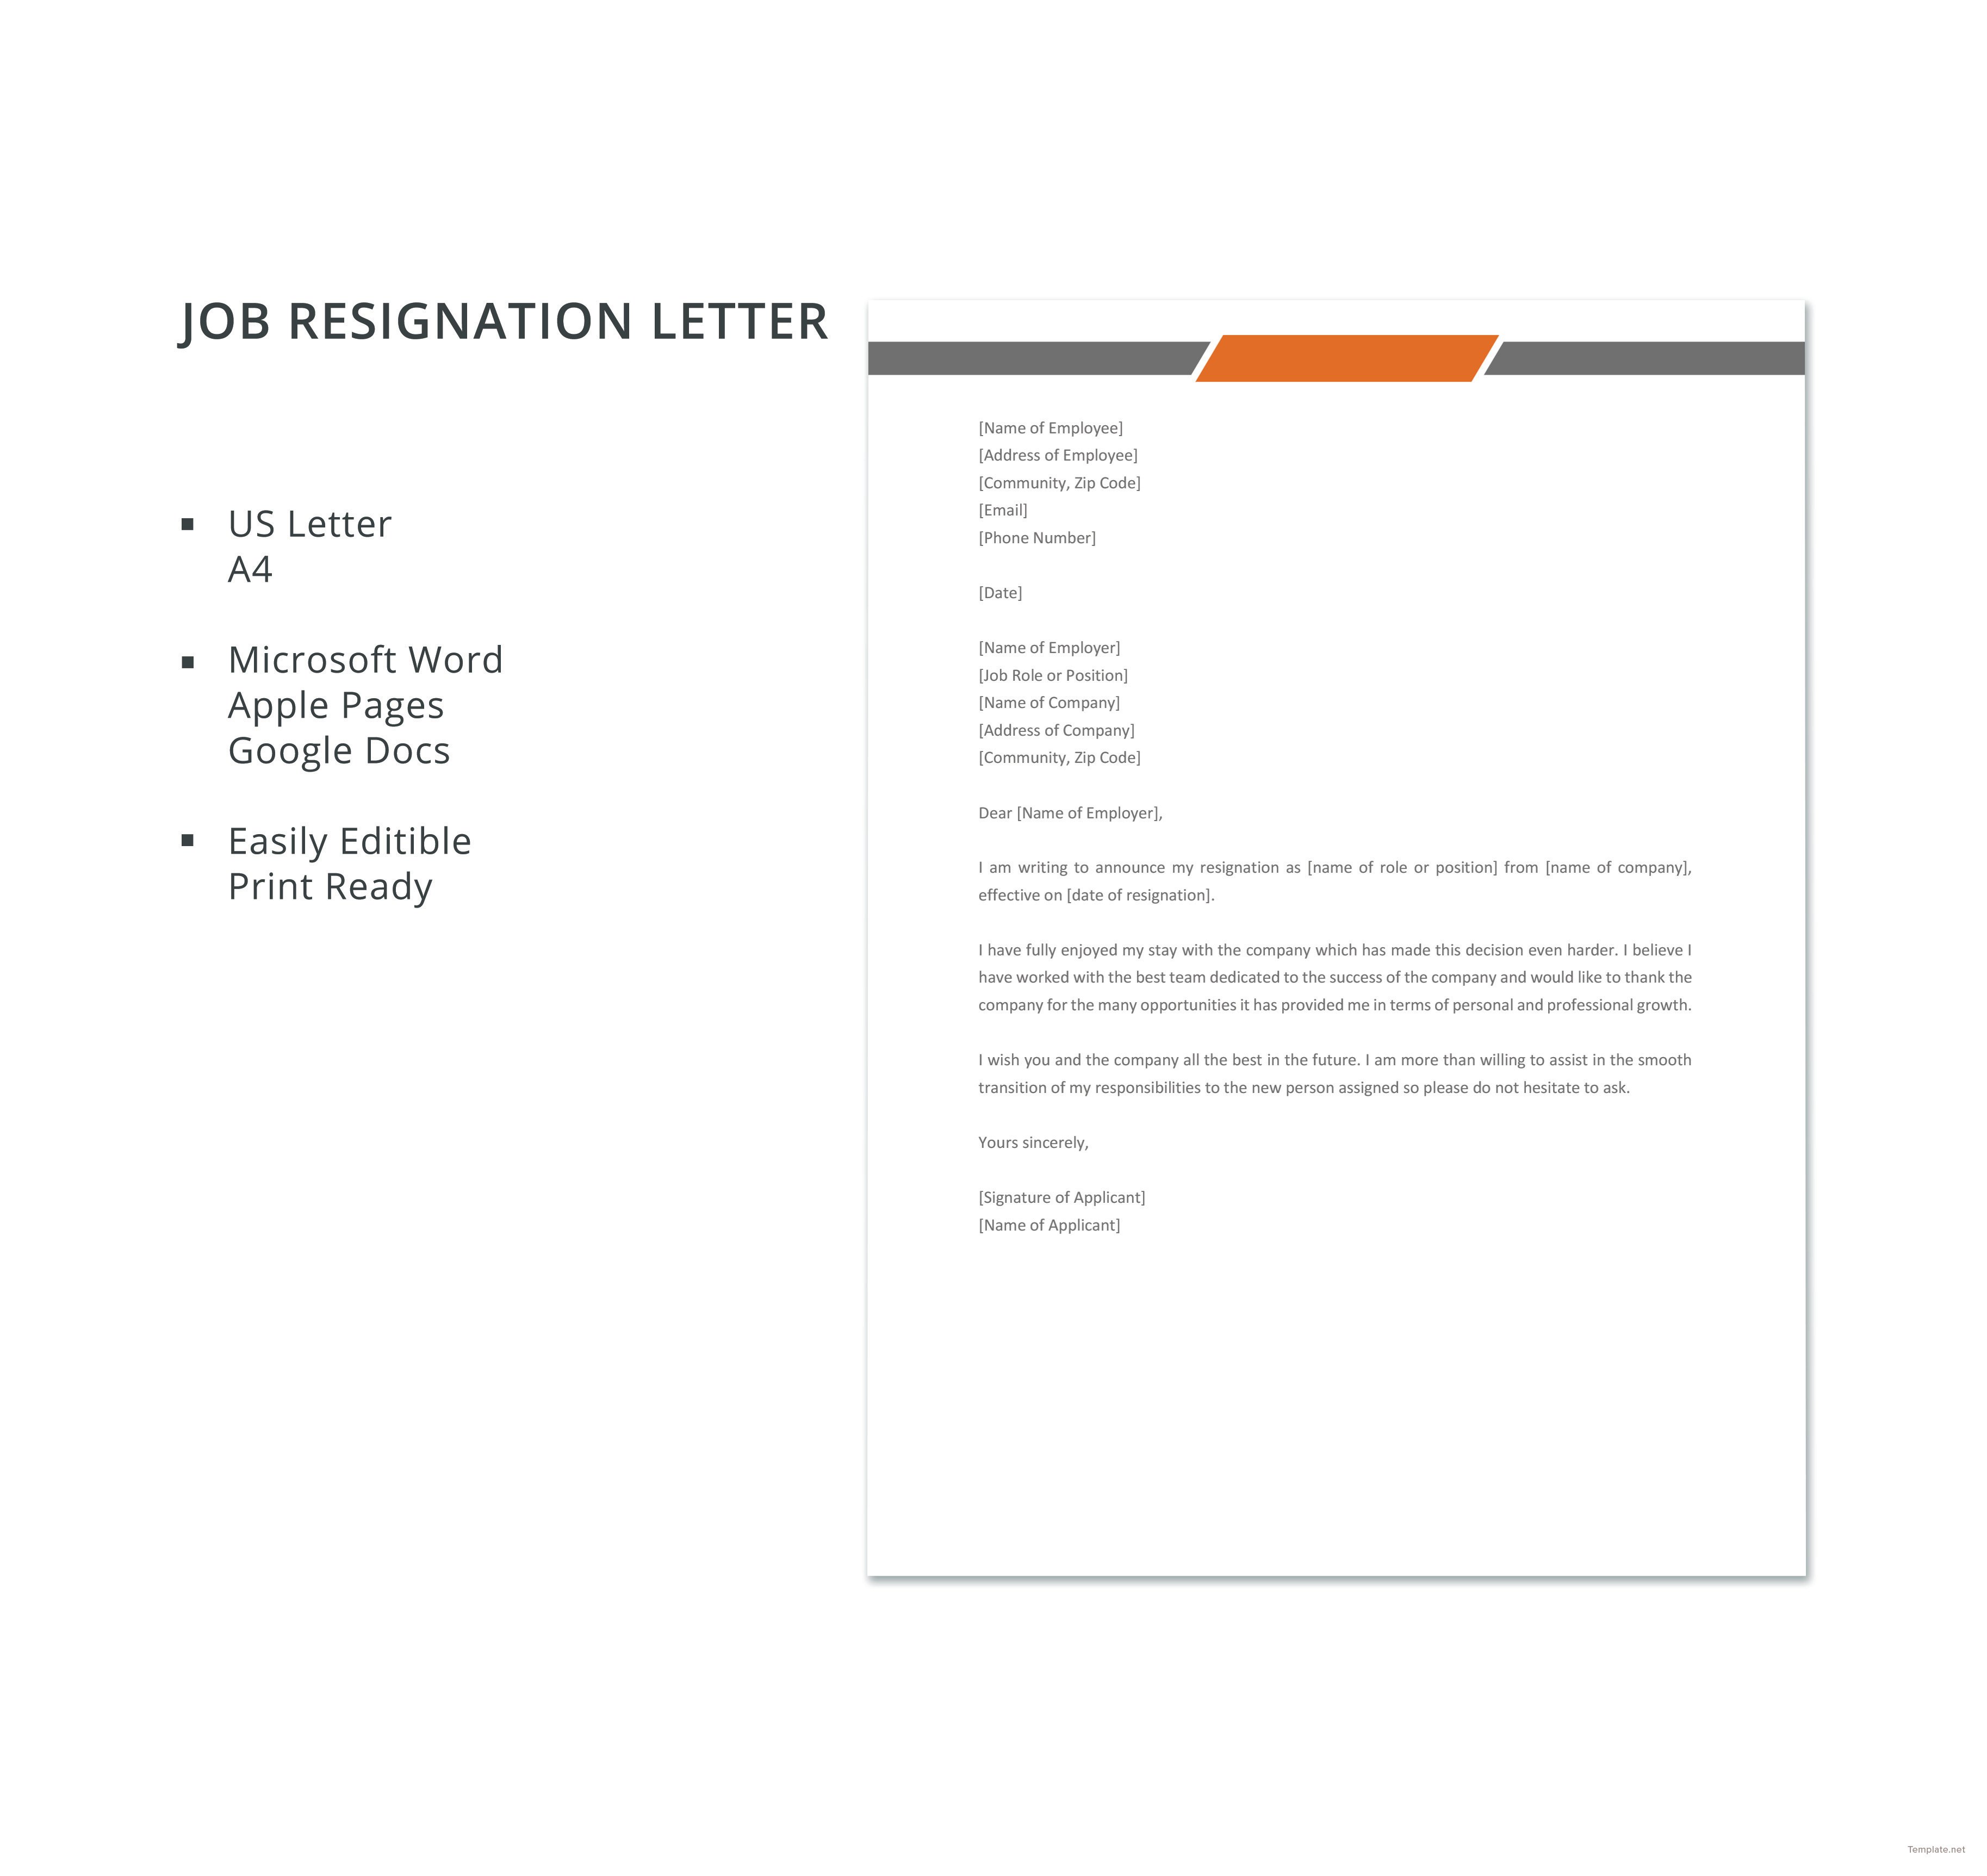 Job Resignation Letter Template in Microsoft Word Apple Pages Google